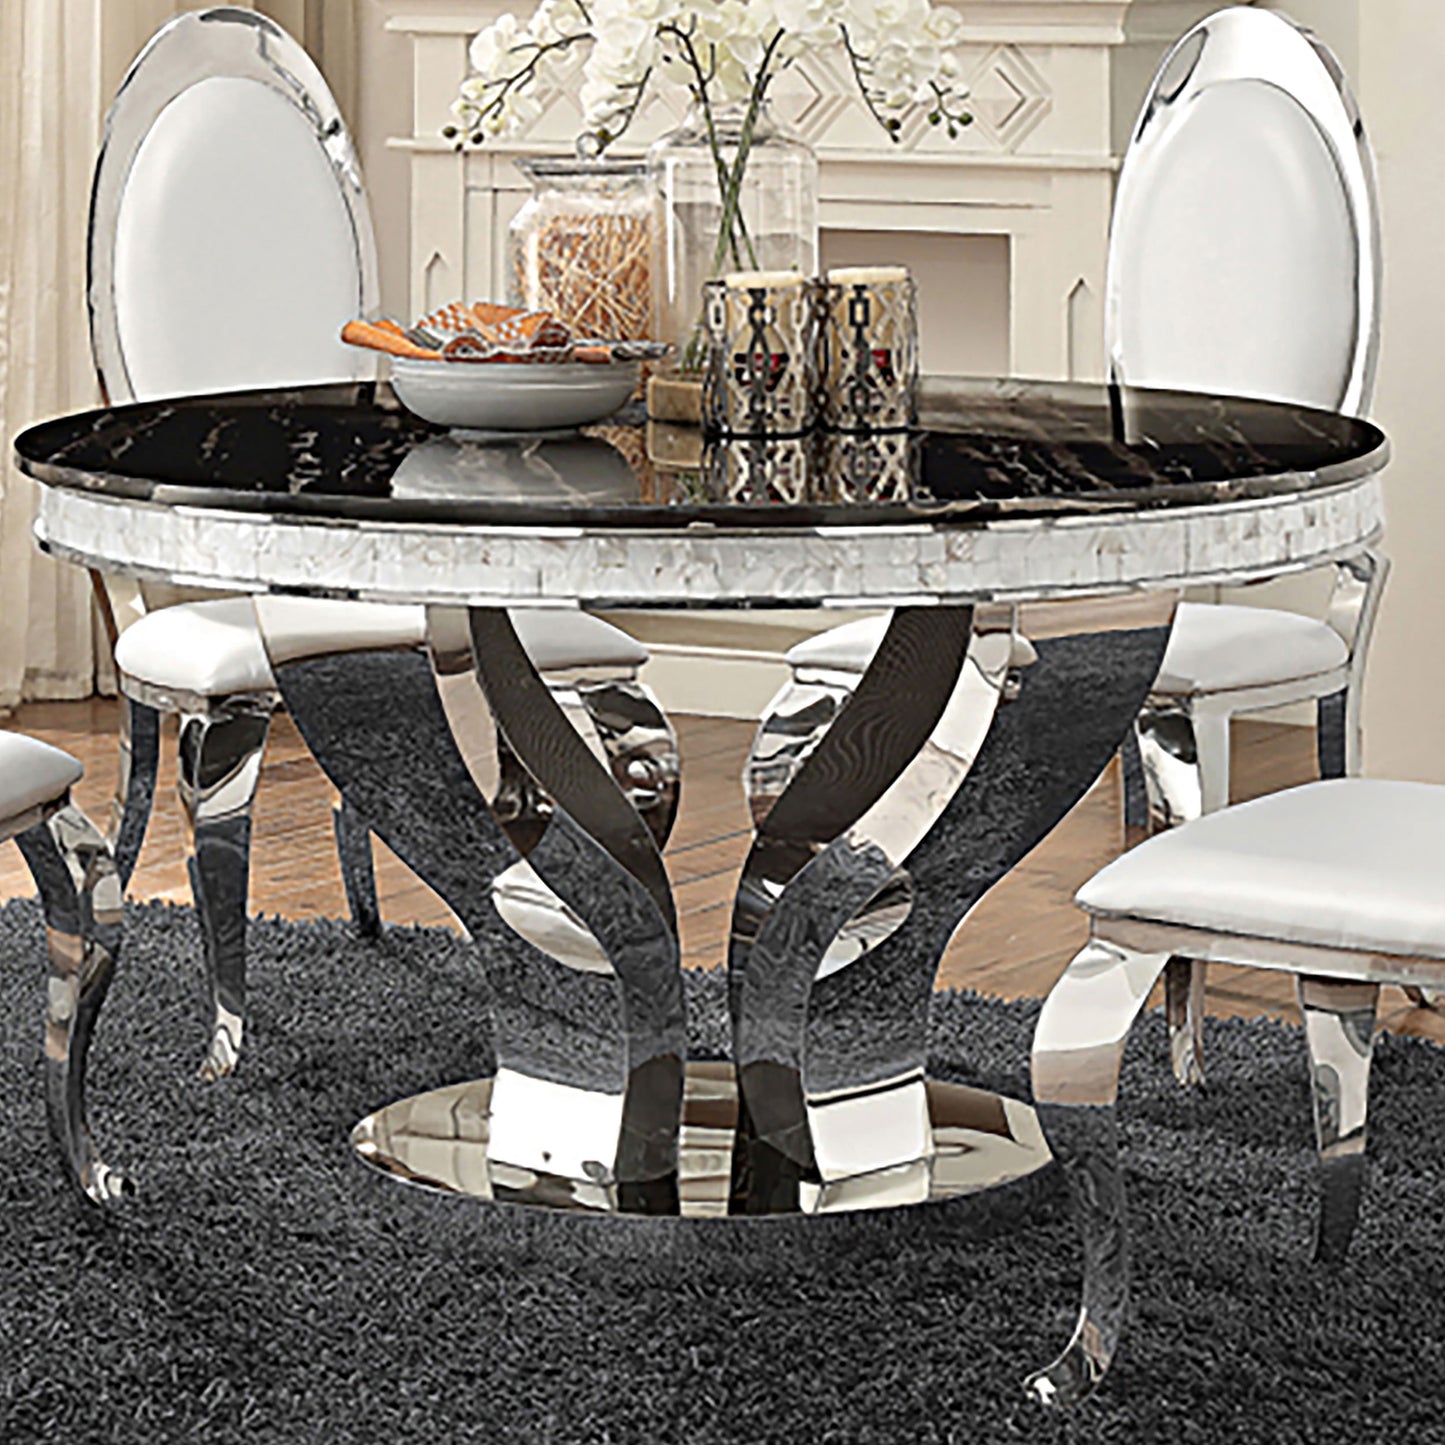 Anchorage Round Dining Table Chrome and Black